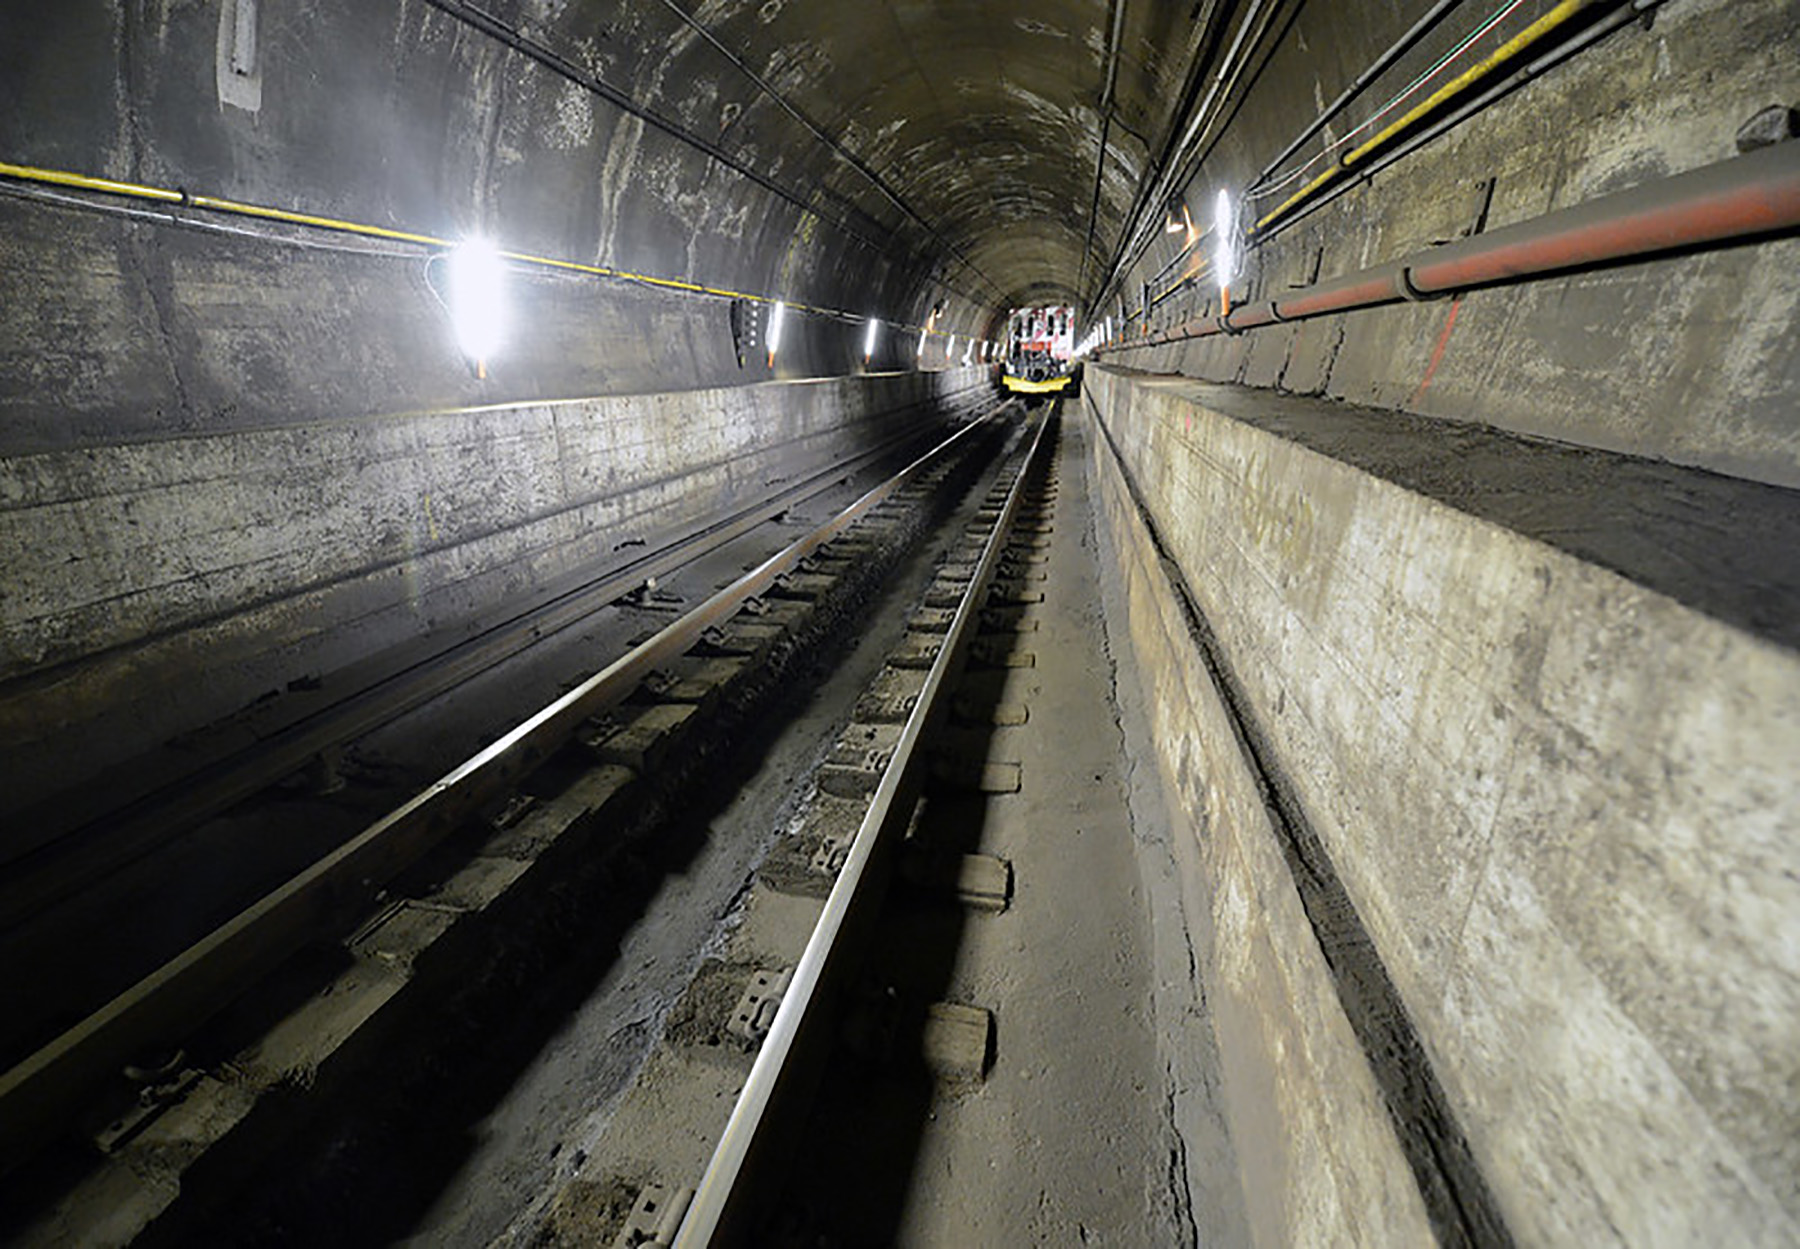 interior shot of a subway tunnel showing the track and walls